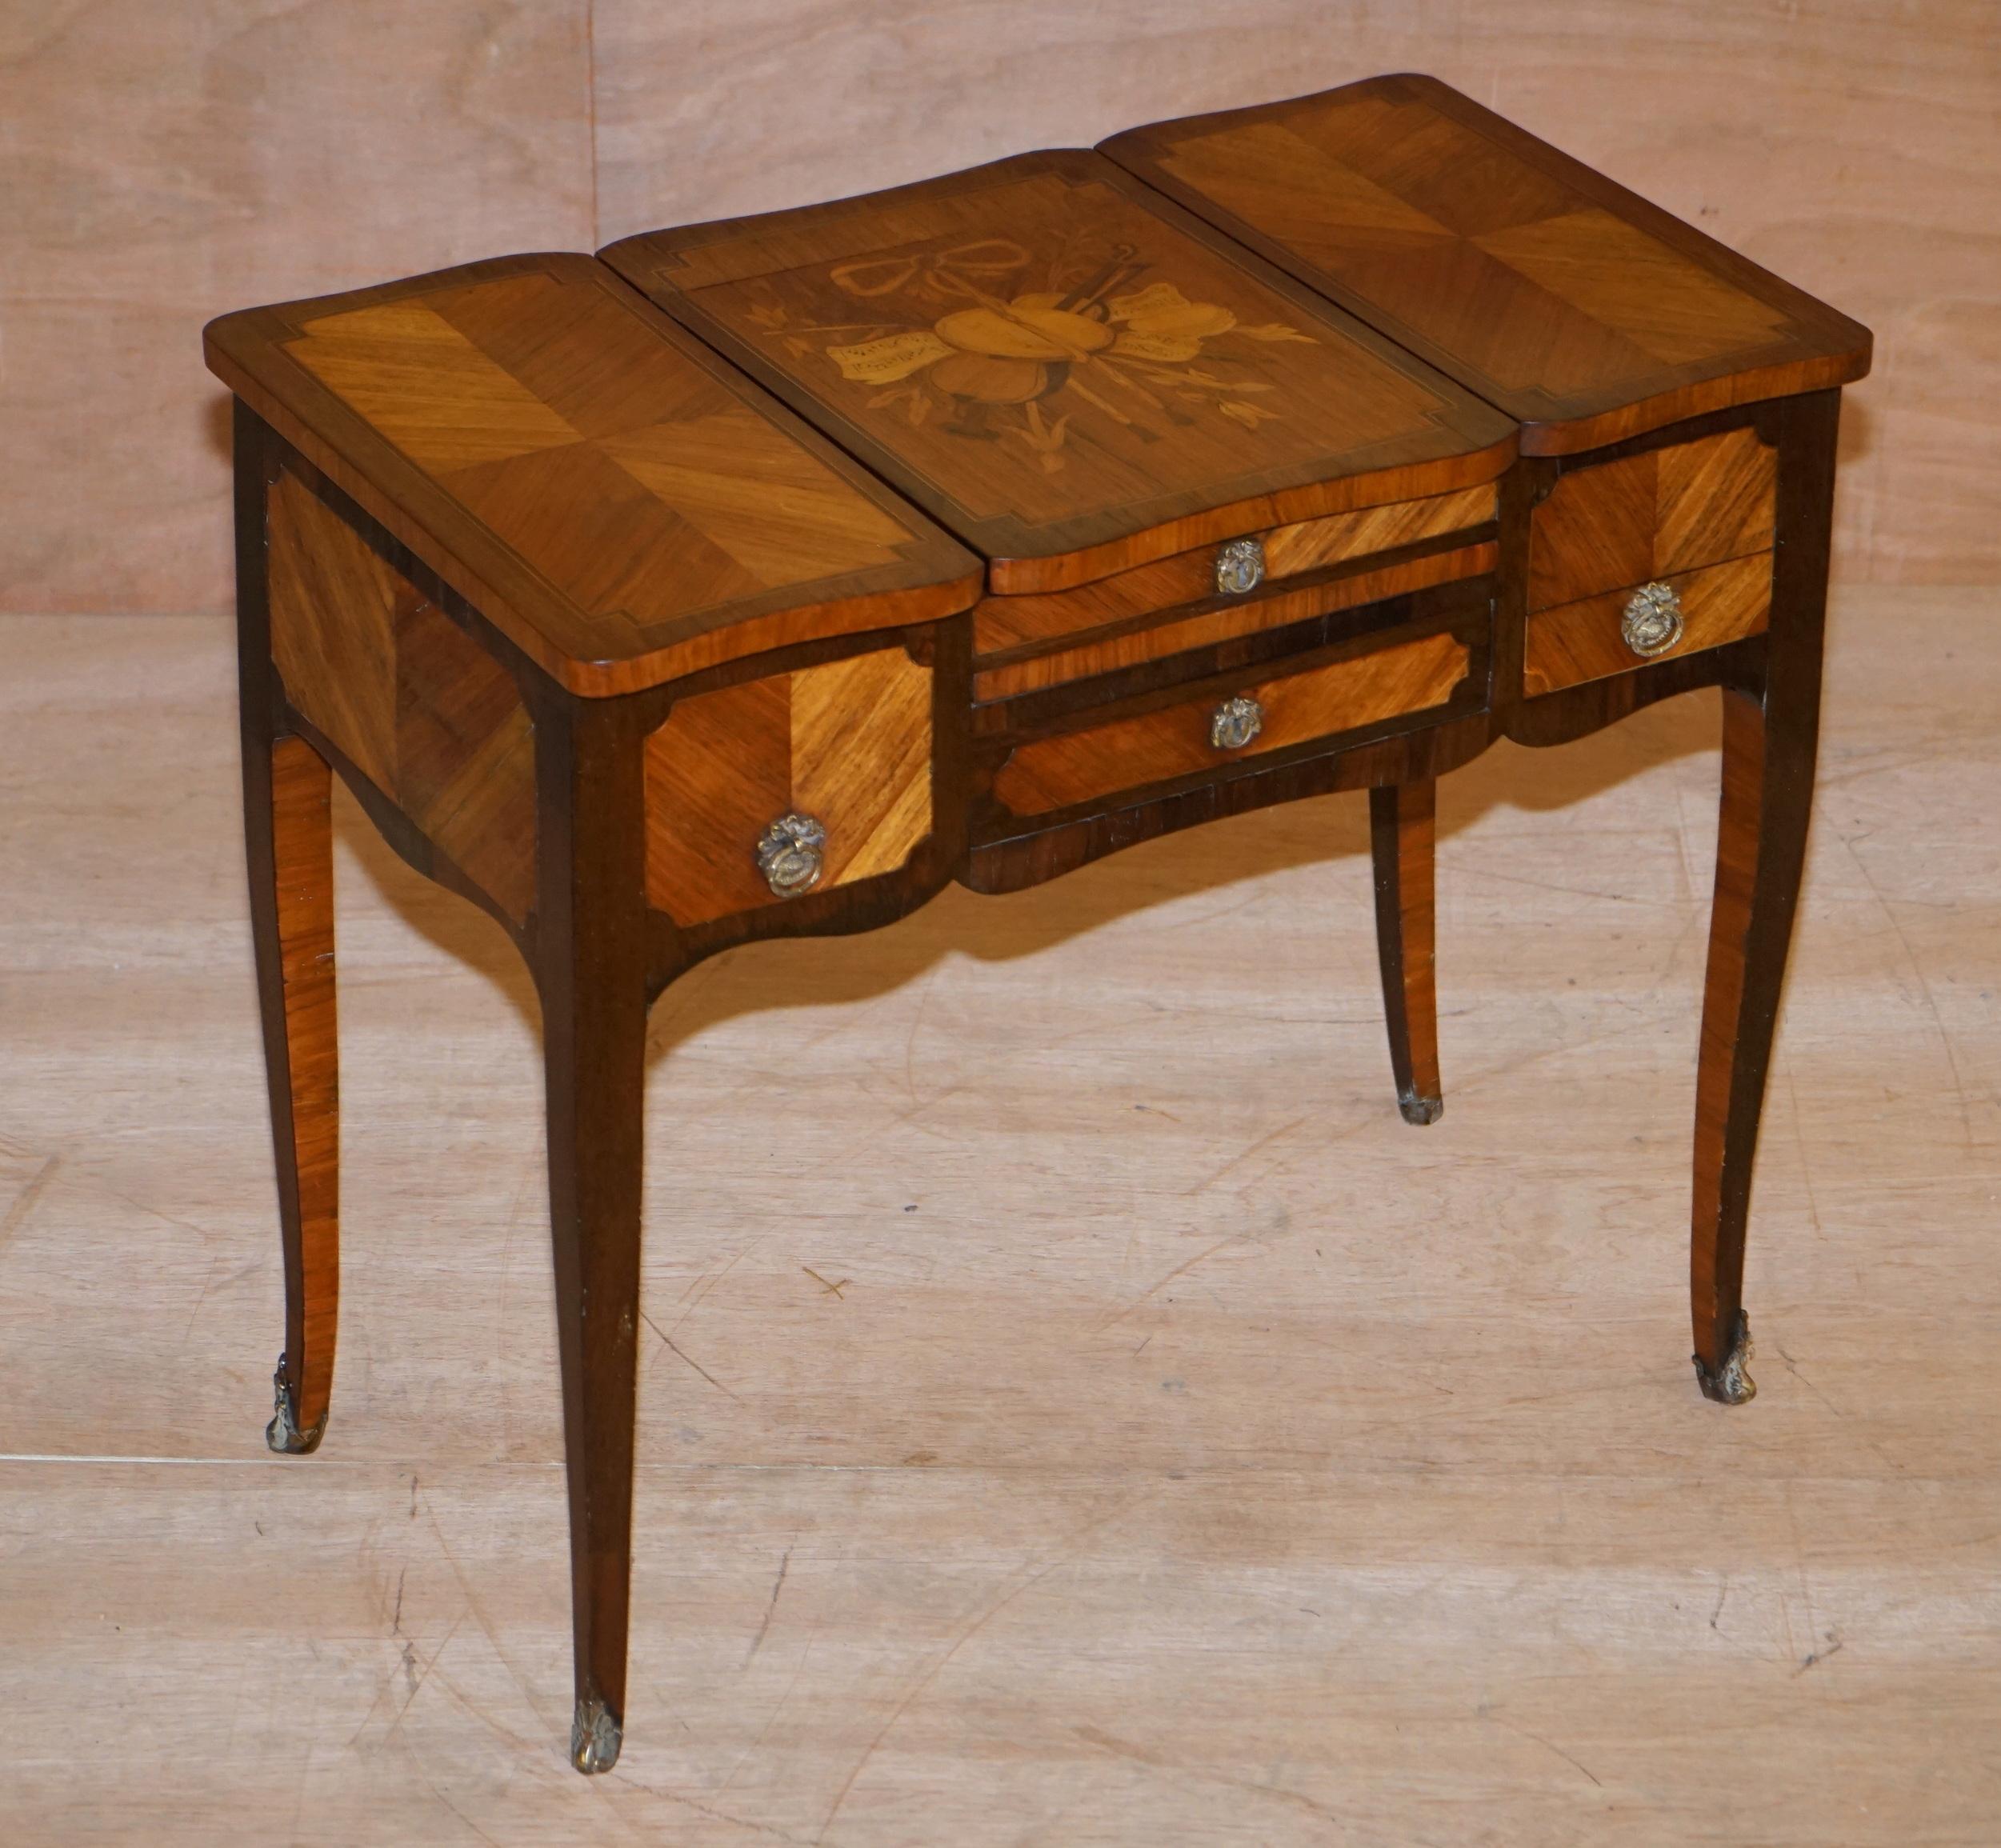 We are delighted to offer this exquisite fully restored Alfred Beurdeley attributed 19th century French Louis XV Kingwood Coiffeuse dressing table

This is the best example of a Coiffeuse table I have ever seen. The marquetry inlay can only really